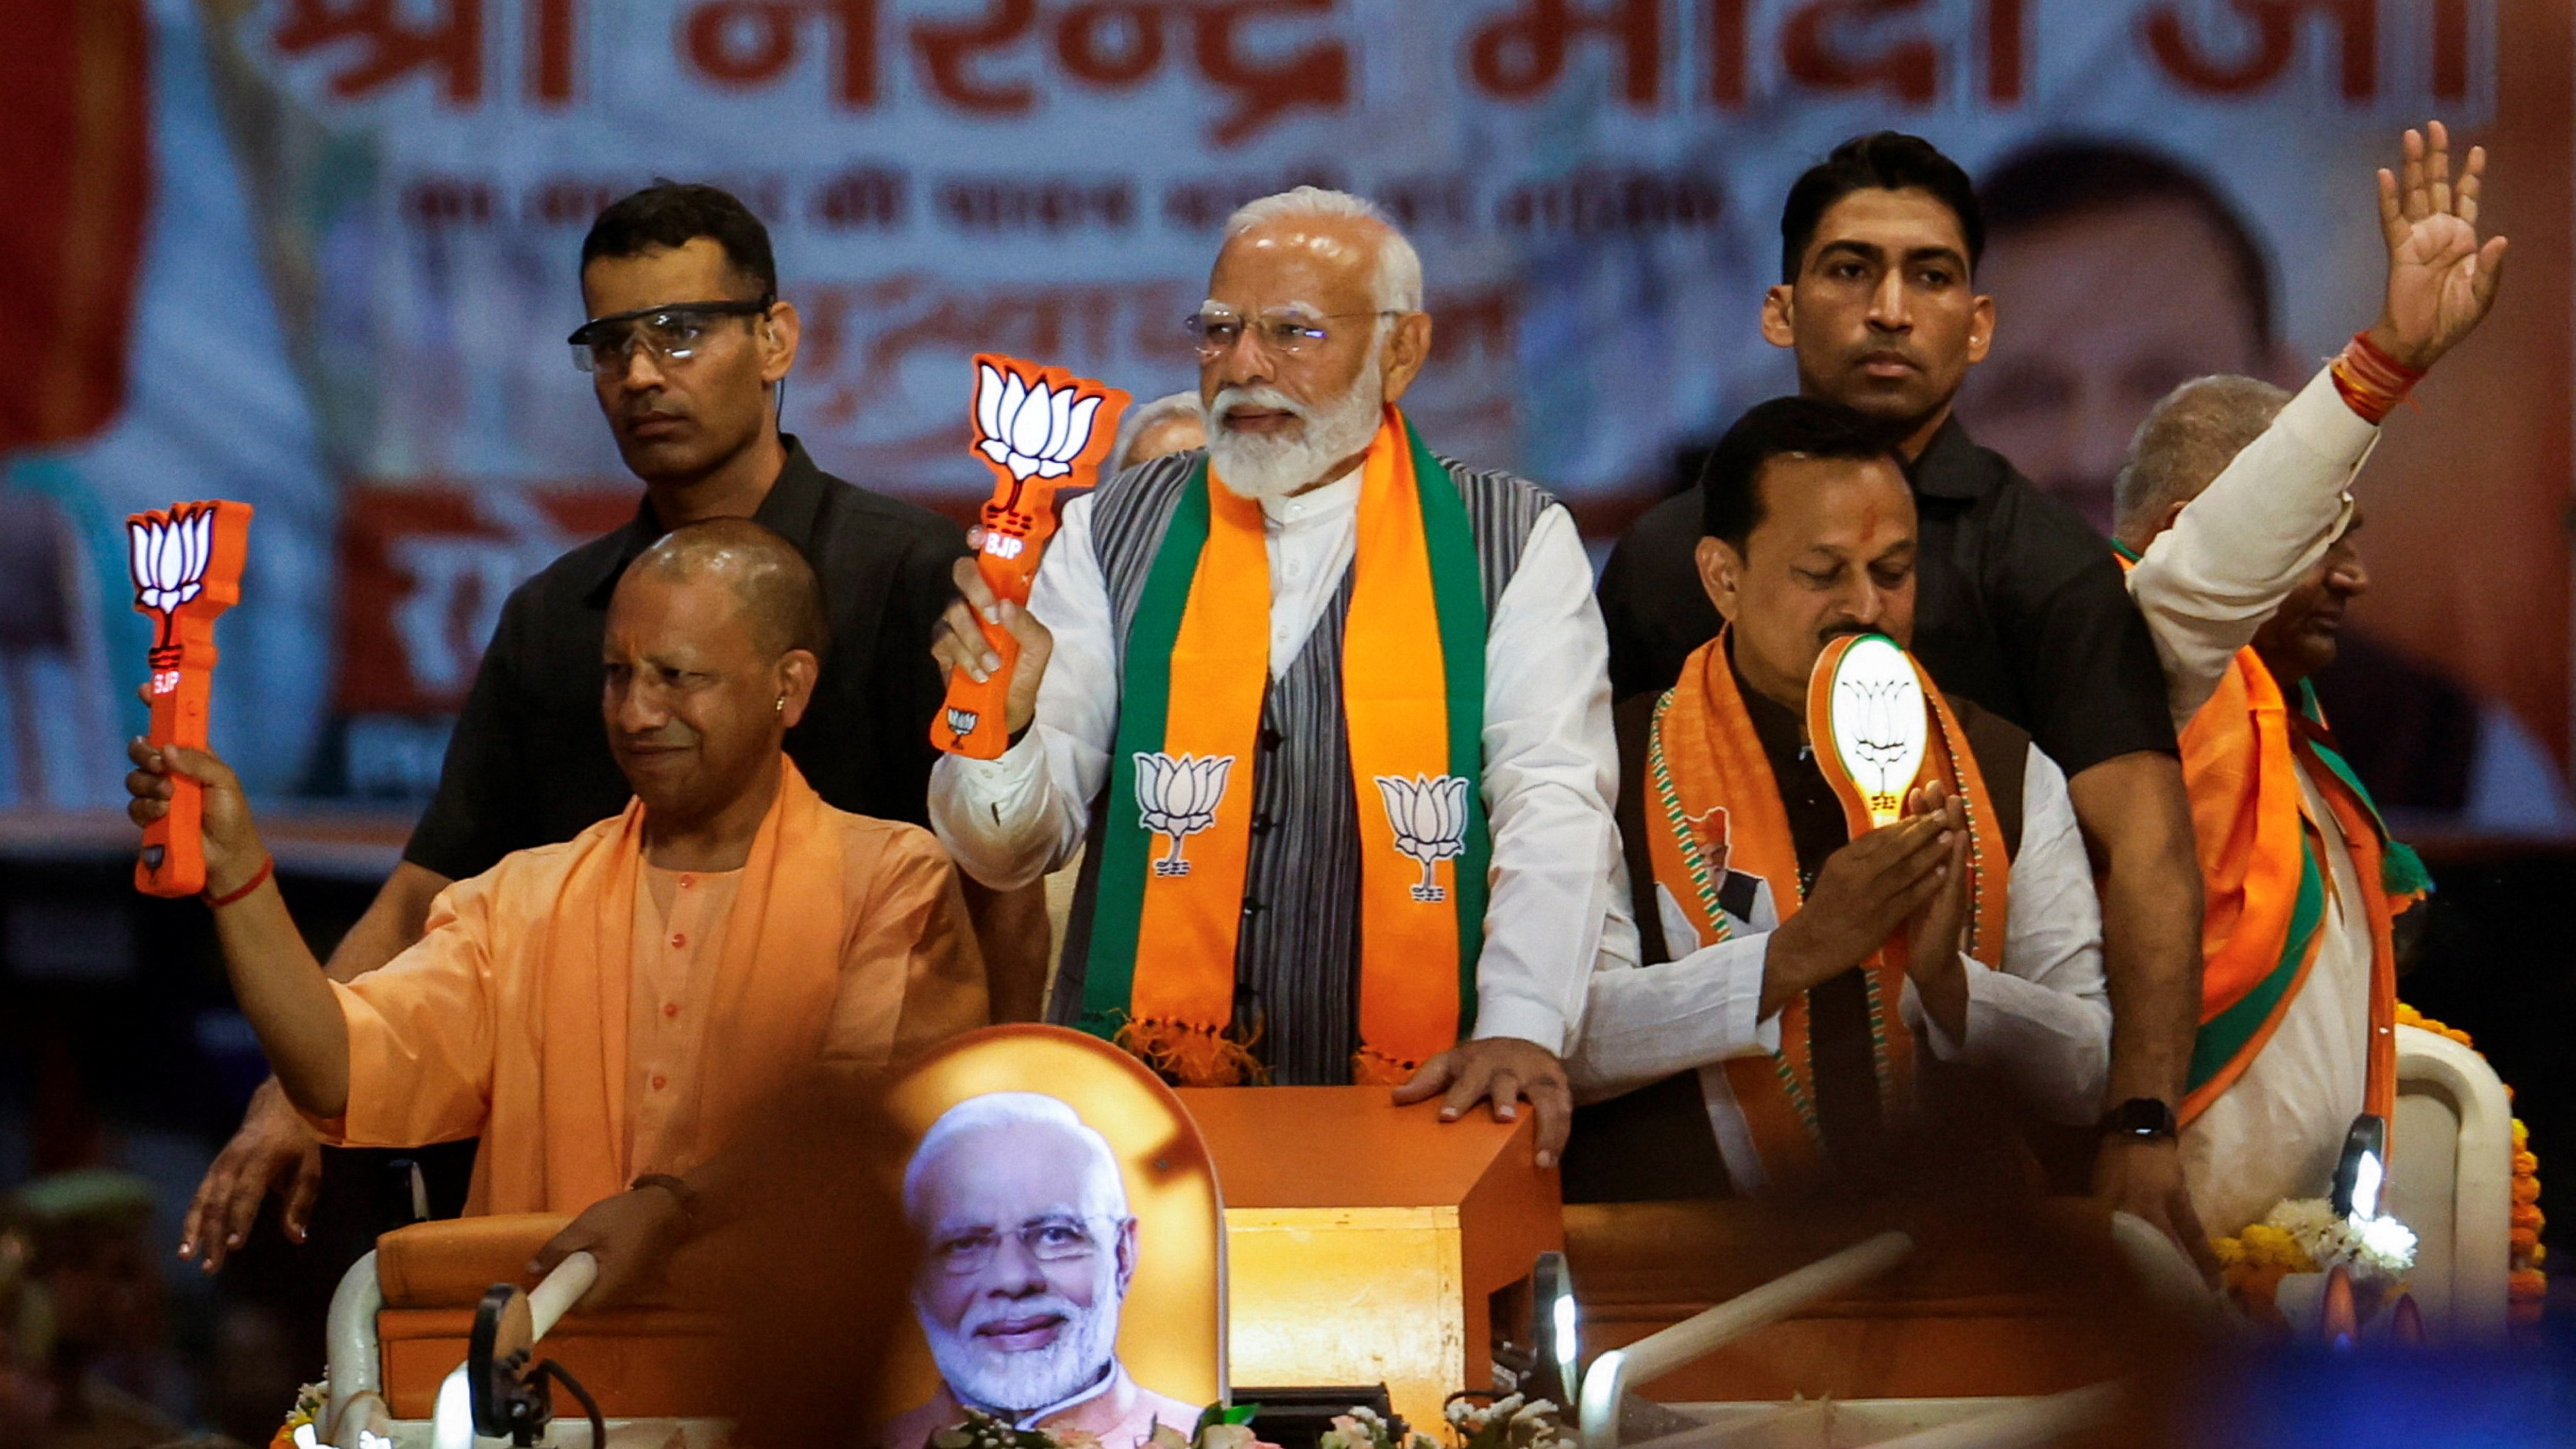 The claims have embroiled Narendra Modi in a damaging scandal in the thick of India’s six-week general election